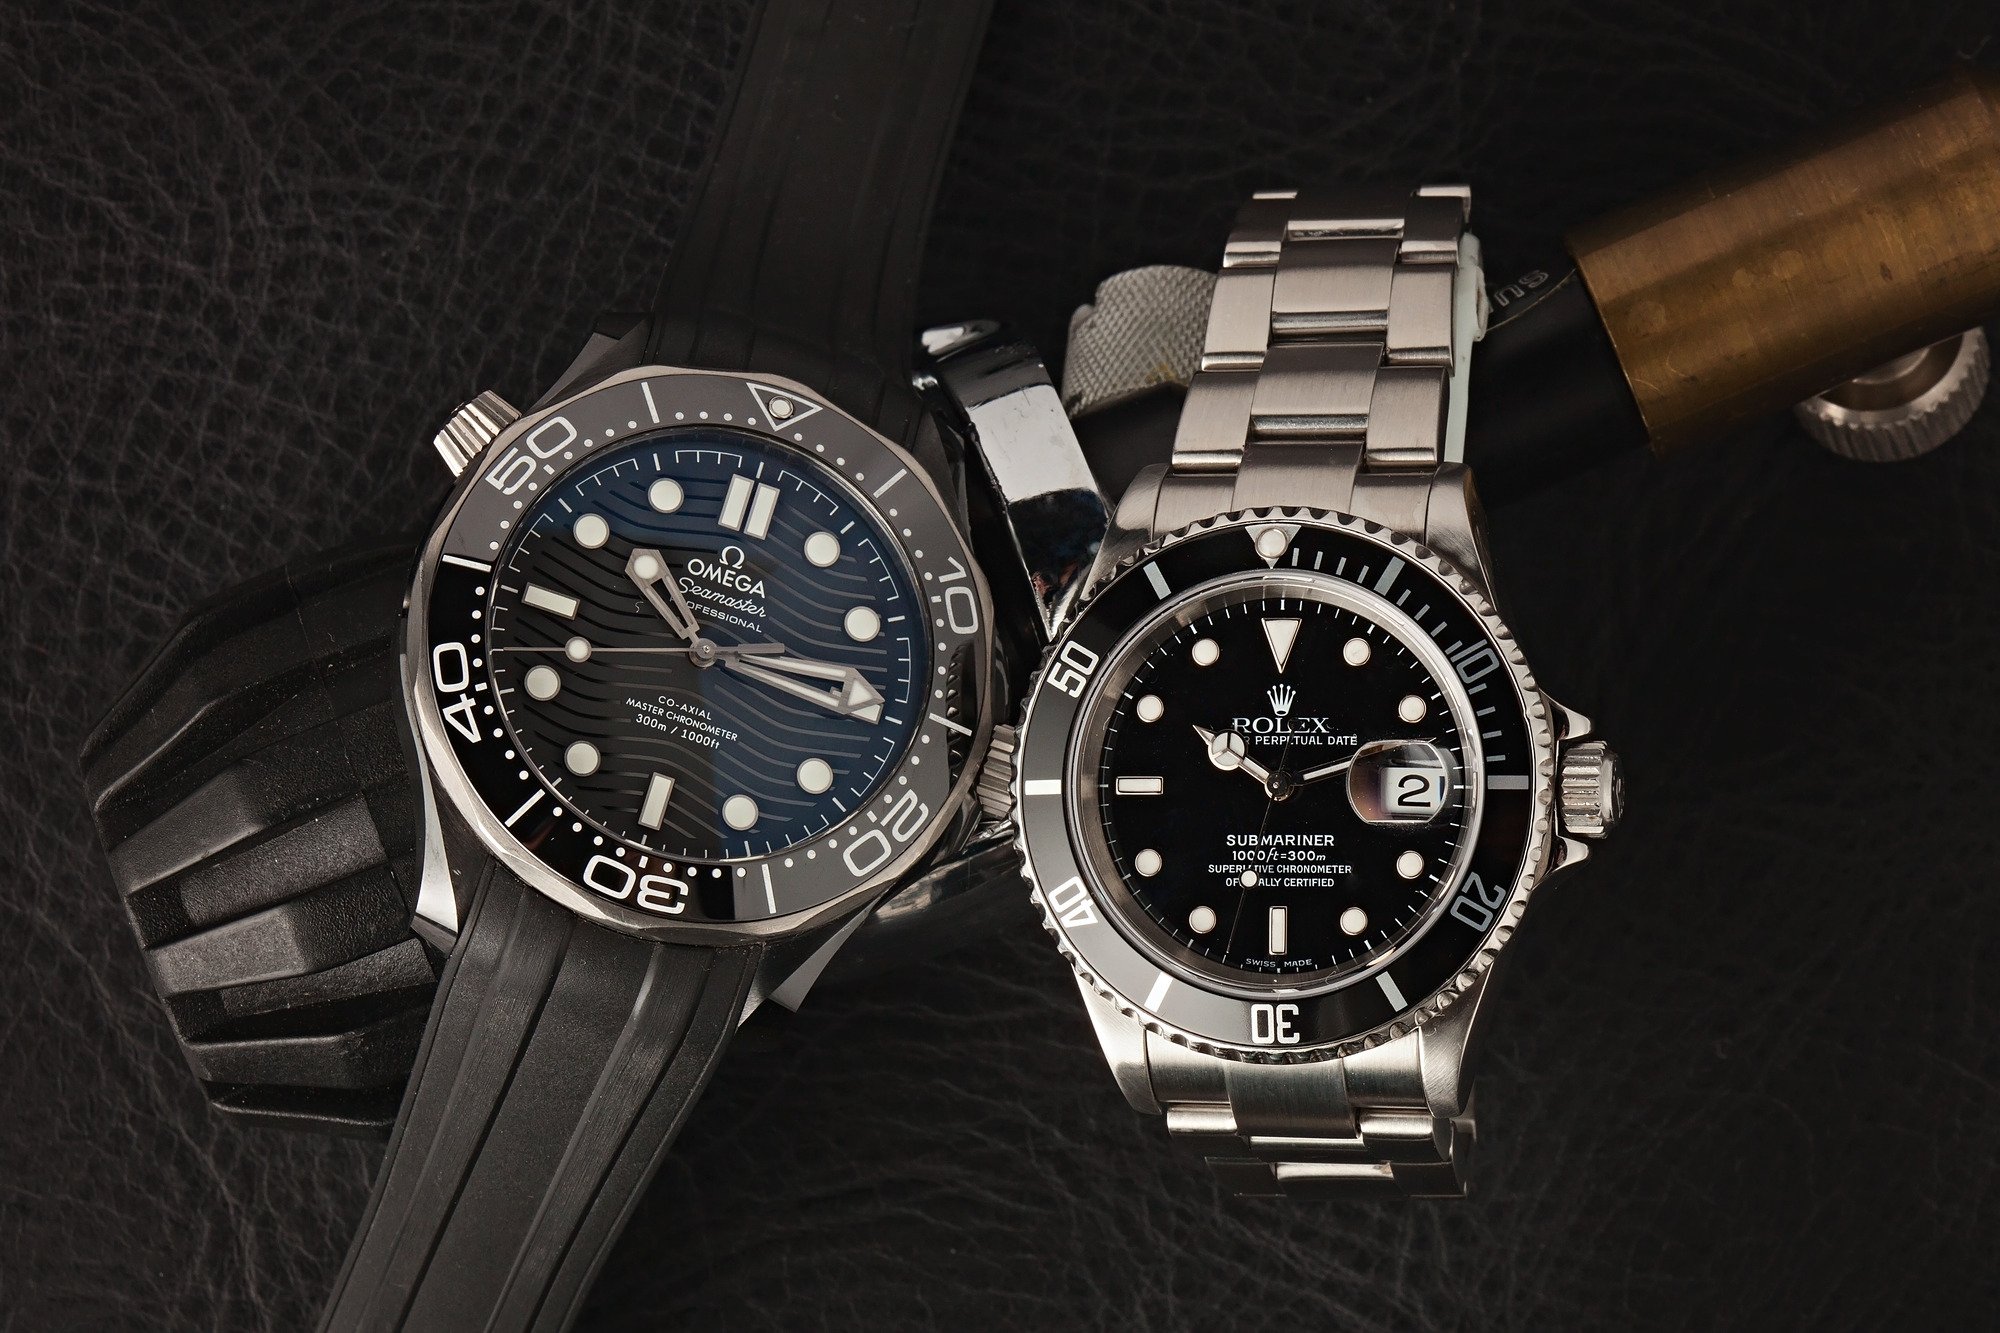 Submariner vs Seamaster: The Ultimate Buying Guide - Bob's Watches